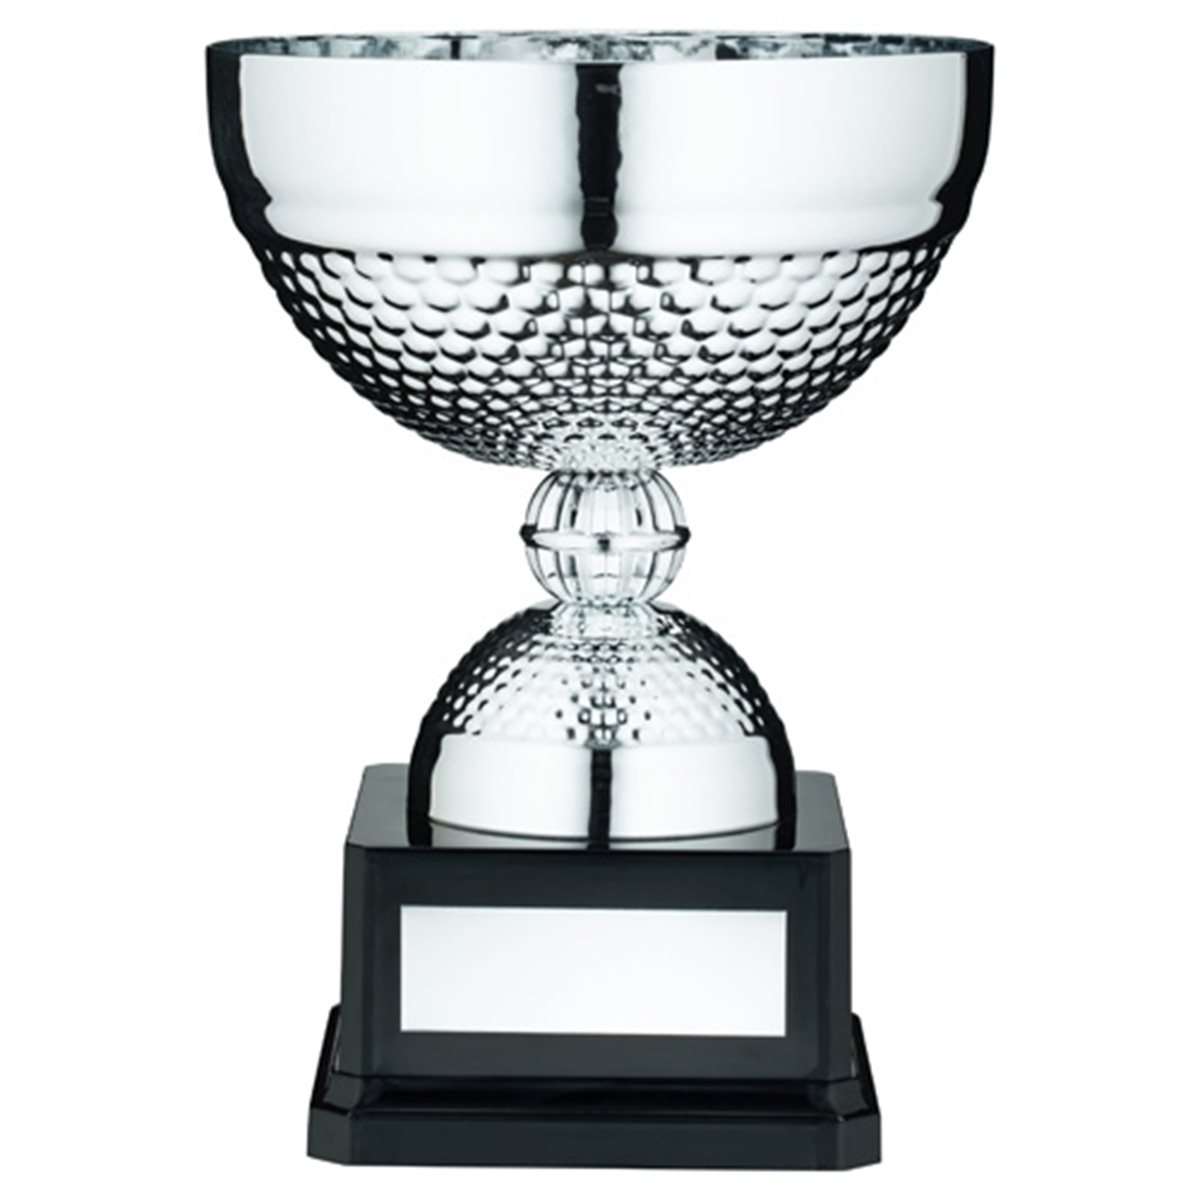 Silver Golf DiMple Bowl Trophy With Plate